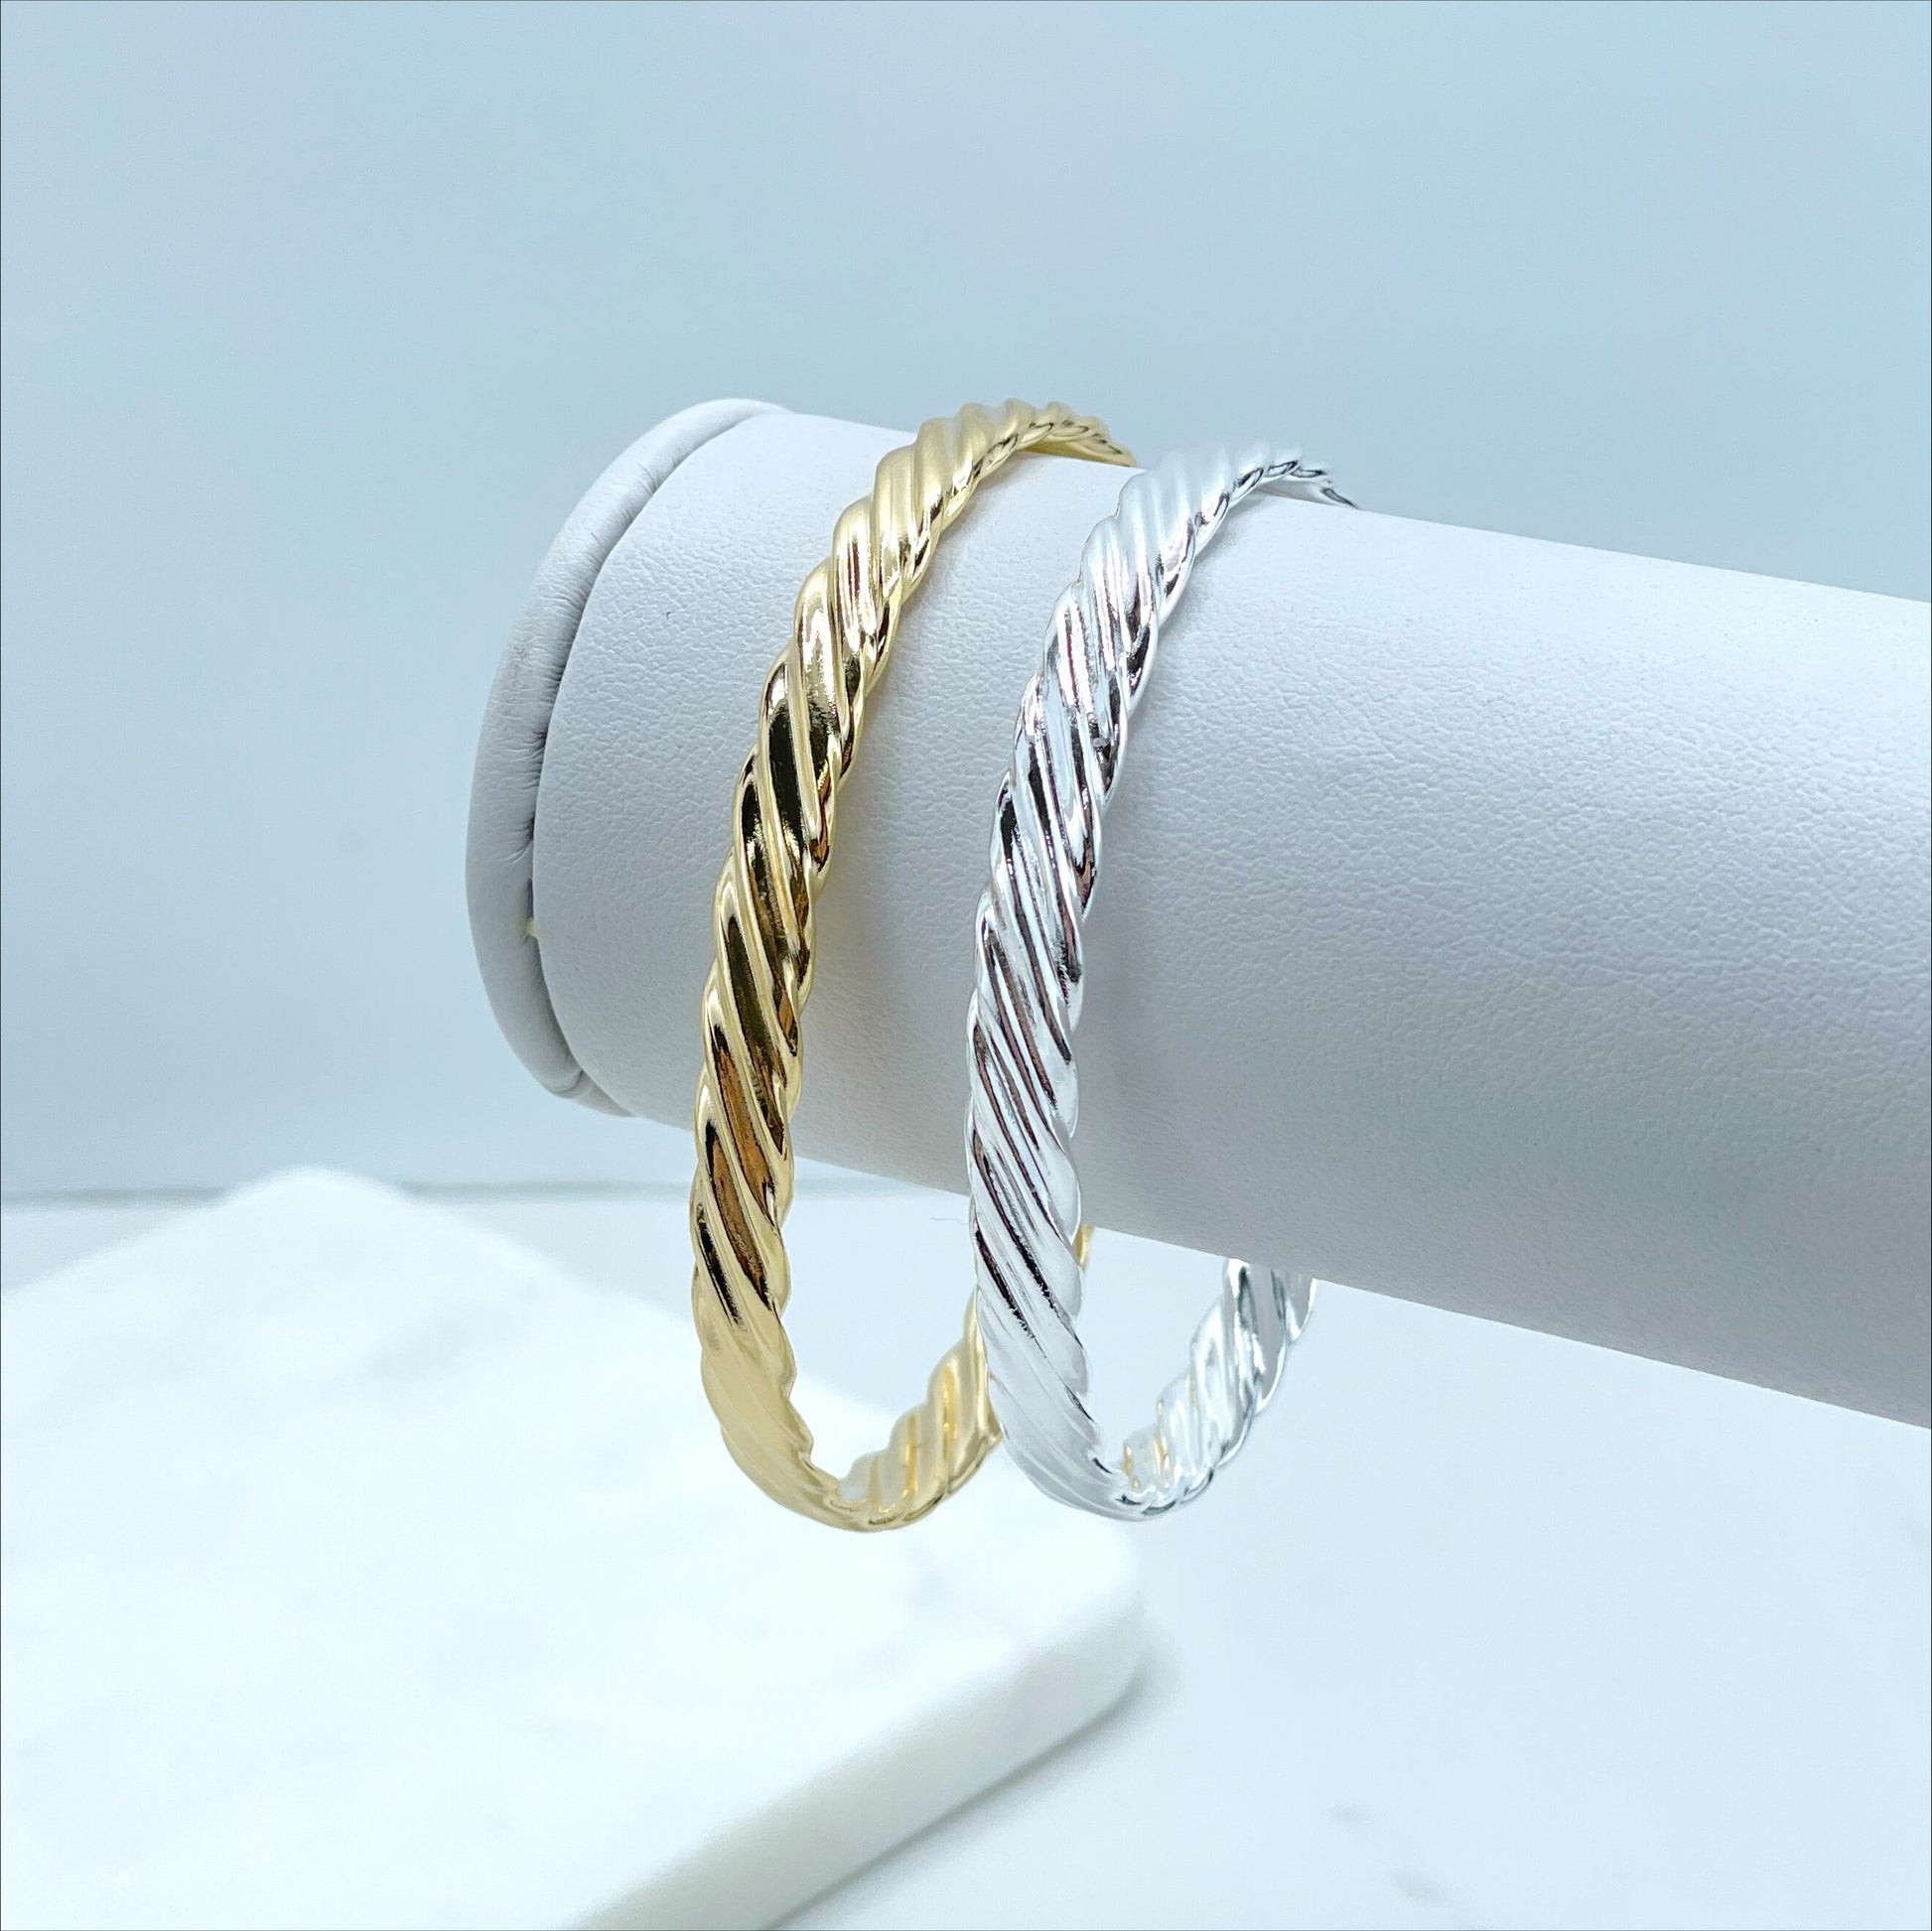 18k Silver Filled or Gold Filled,Texturized Cuff Bracelet, Wholesale Jewelry Making Supplies